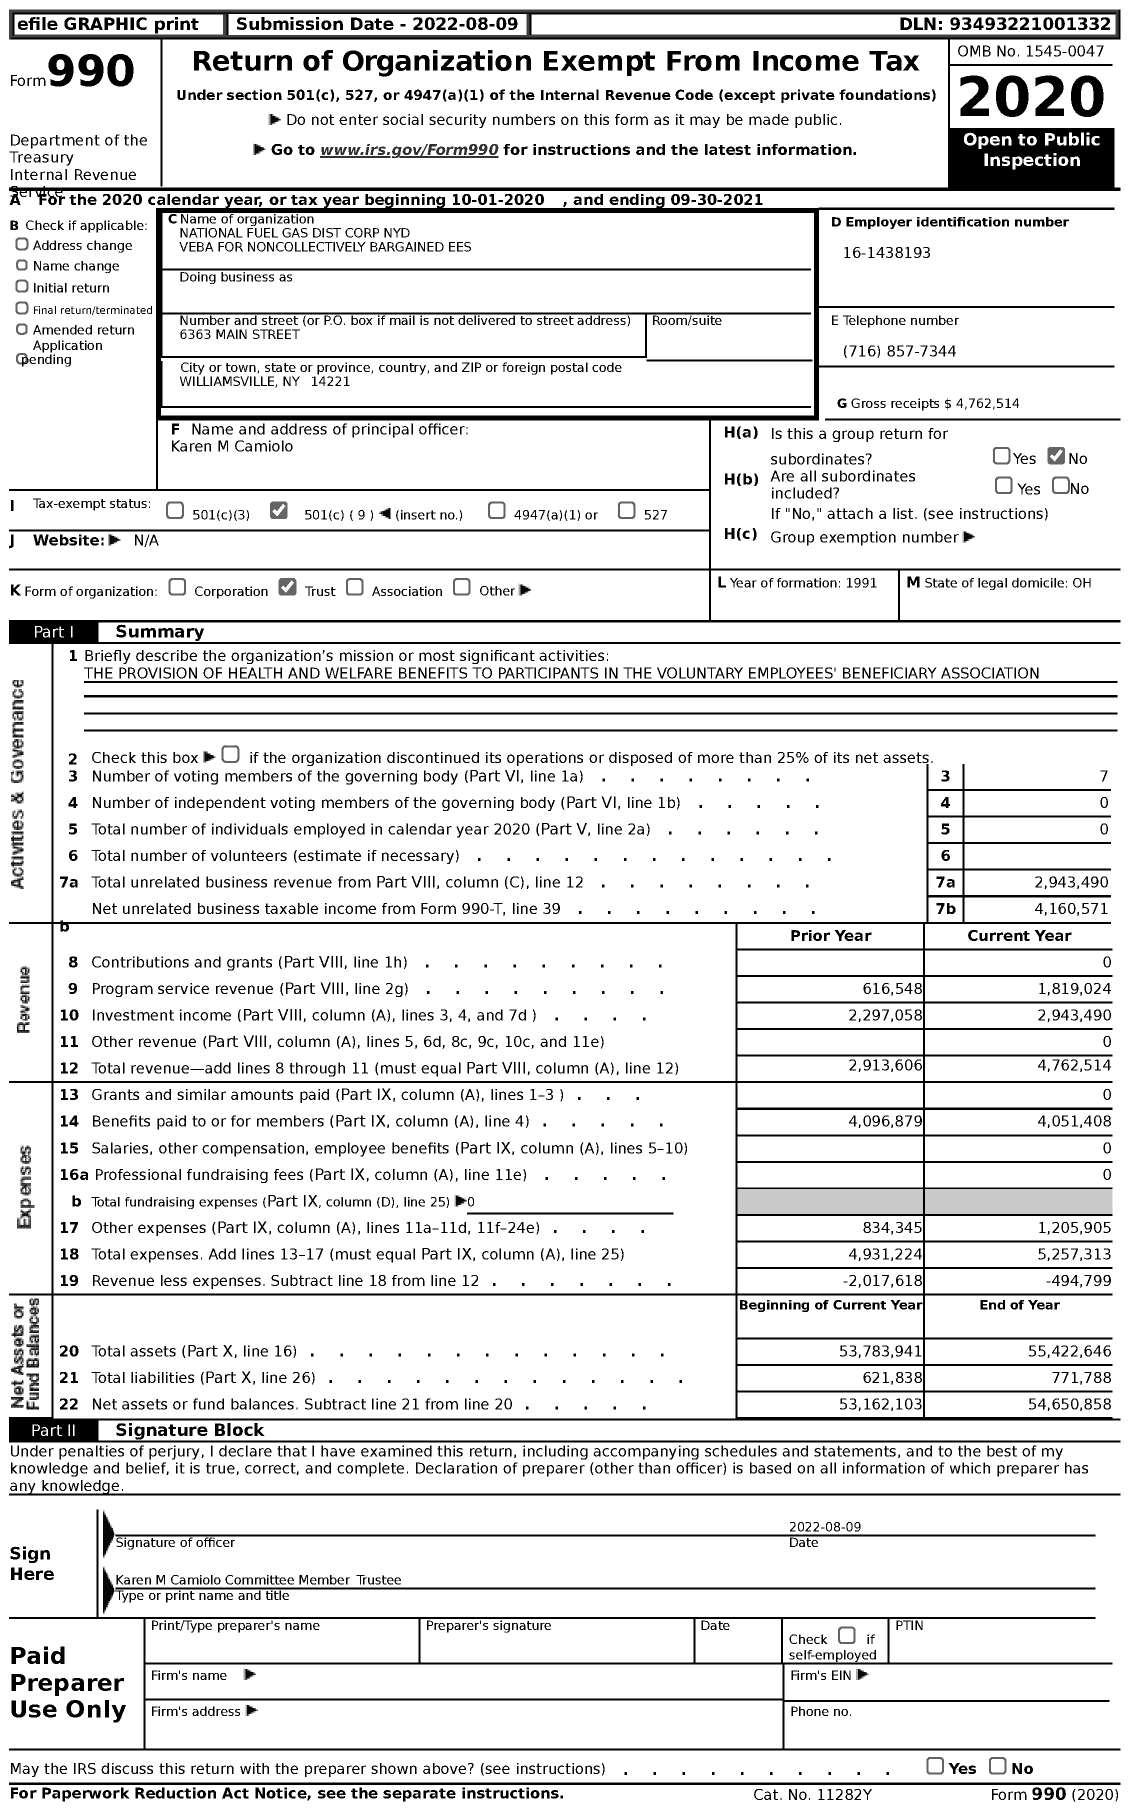 Image of first page of 2020 Form 990 for National Fuel Gas Dist Corp Nyd Veba for Noncollectively Bargained Employees